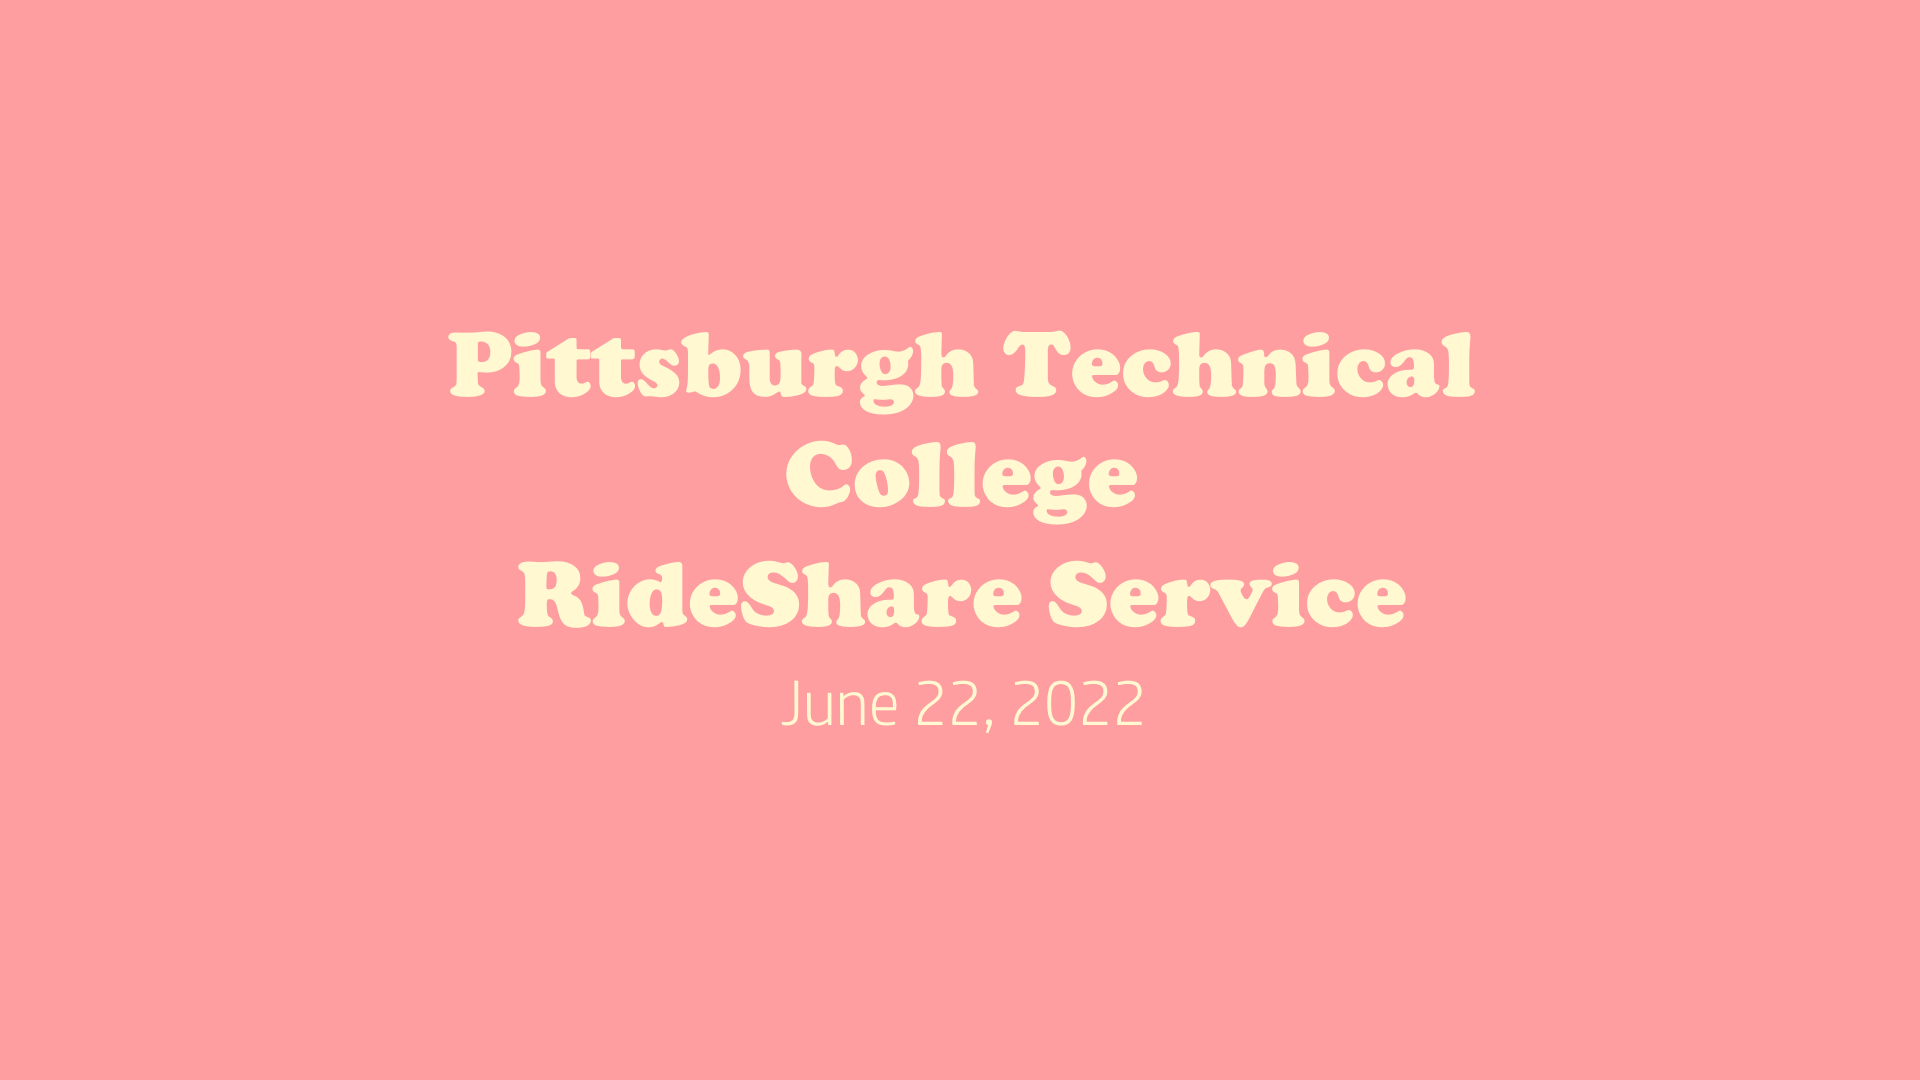 Pittsburgh Technical College RideShare Service